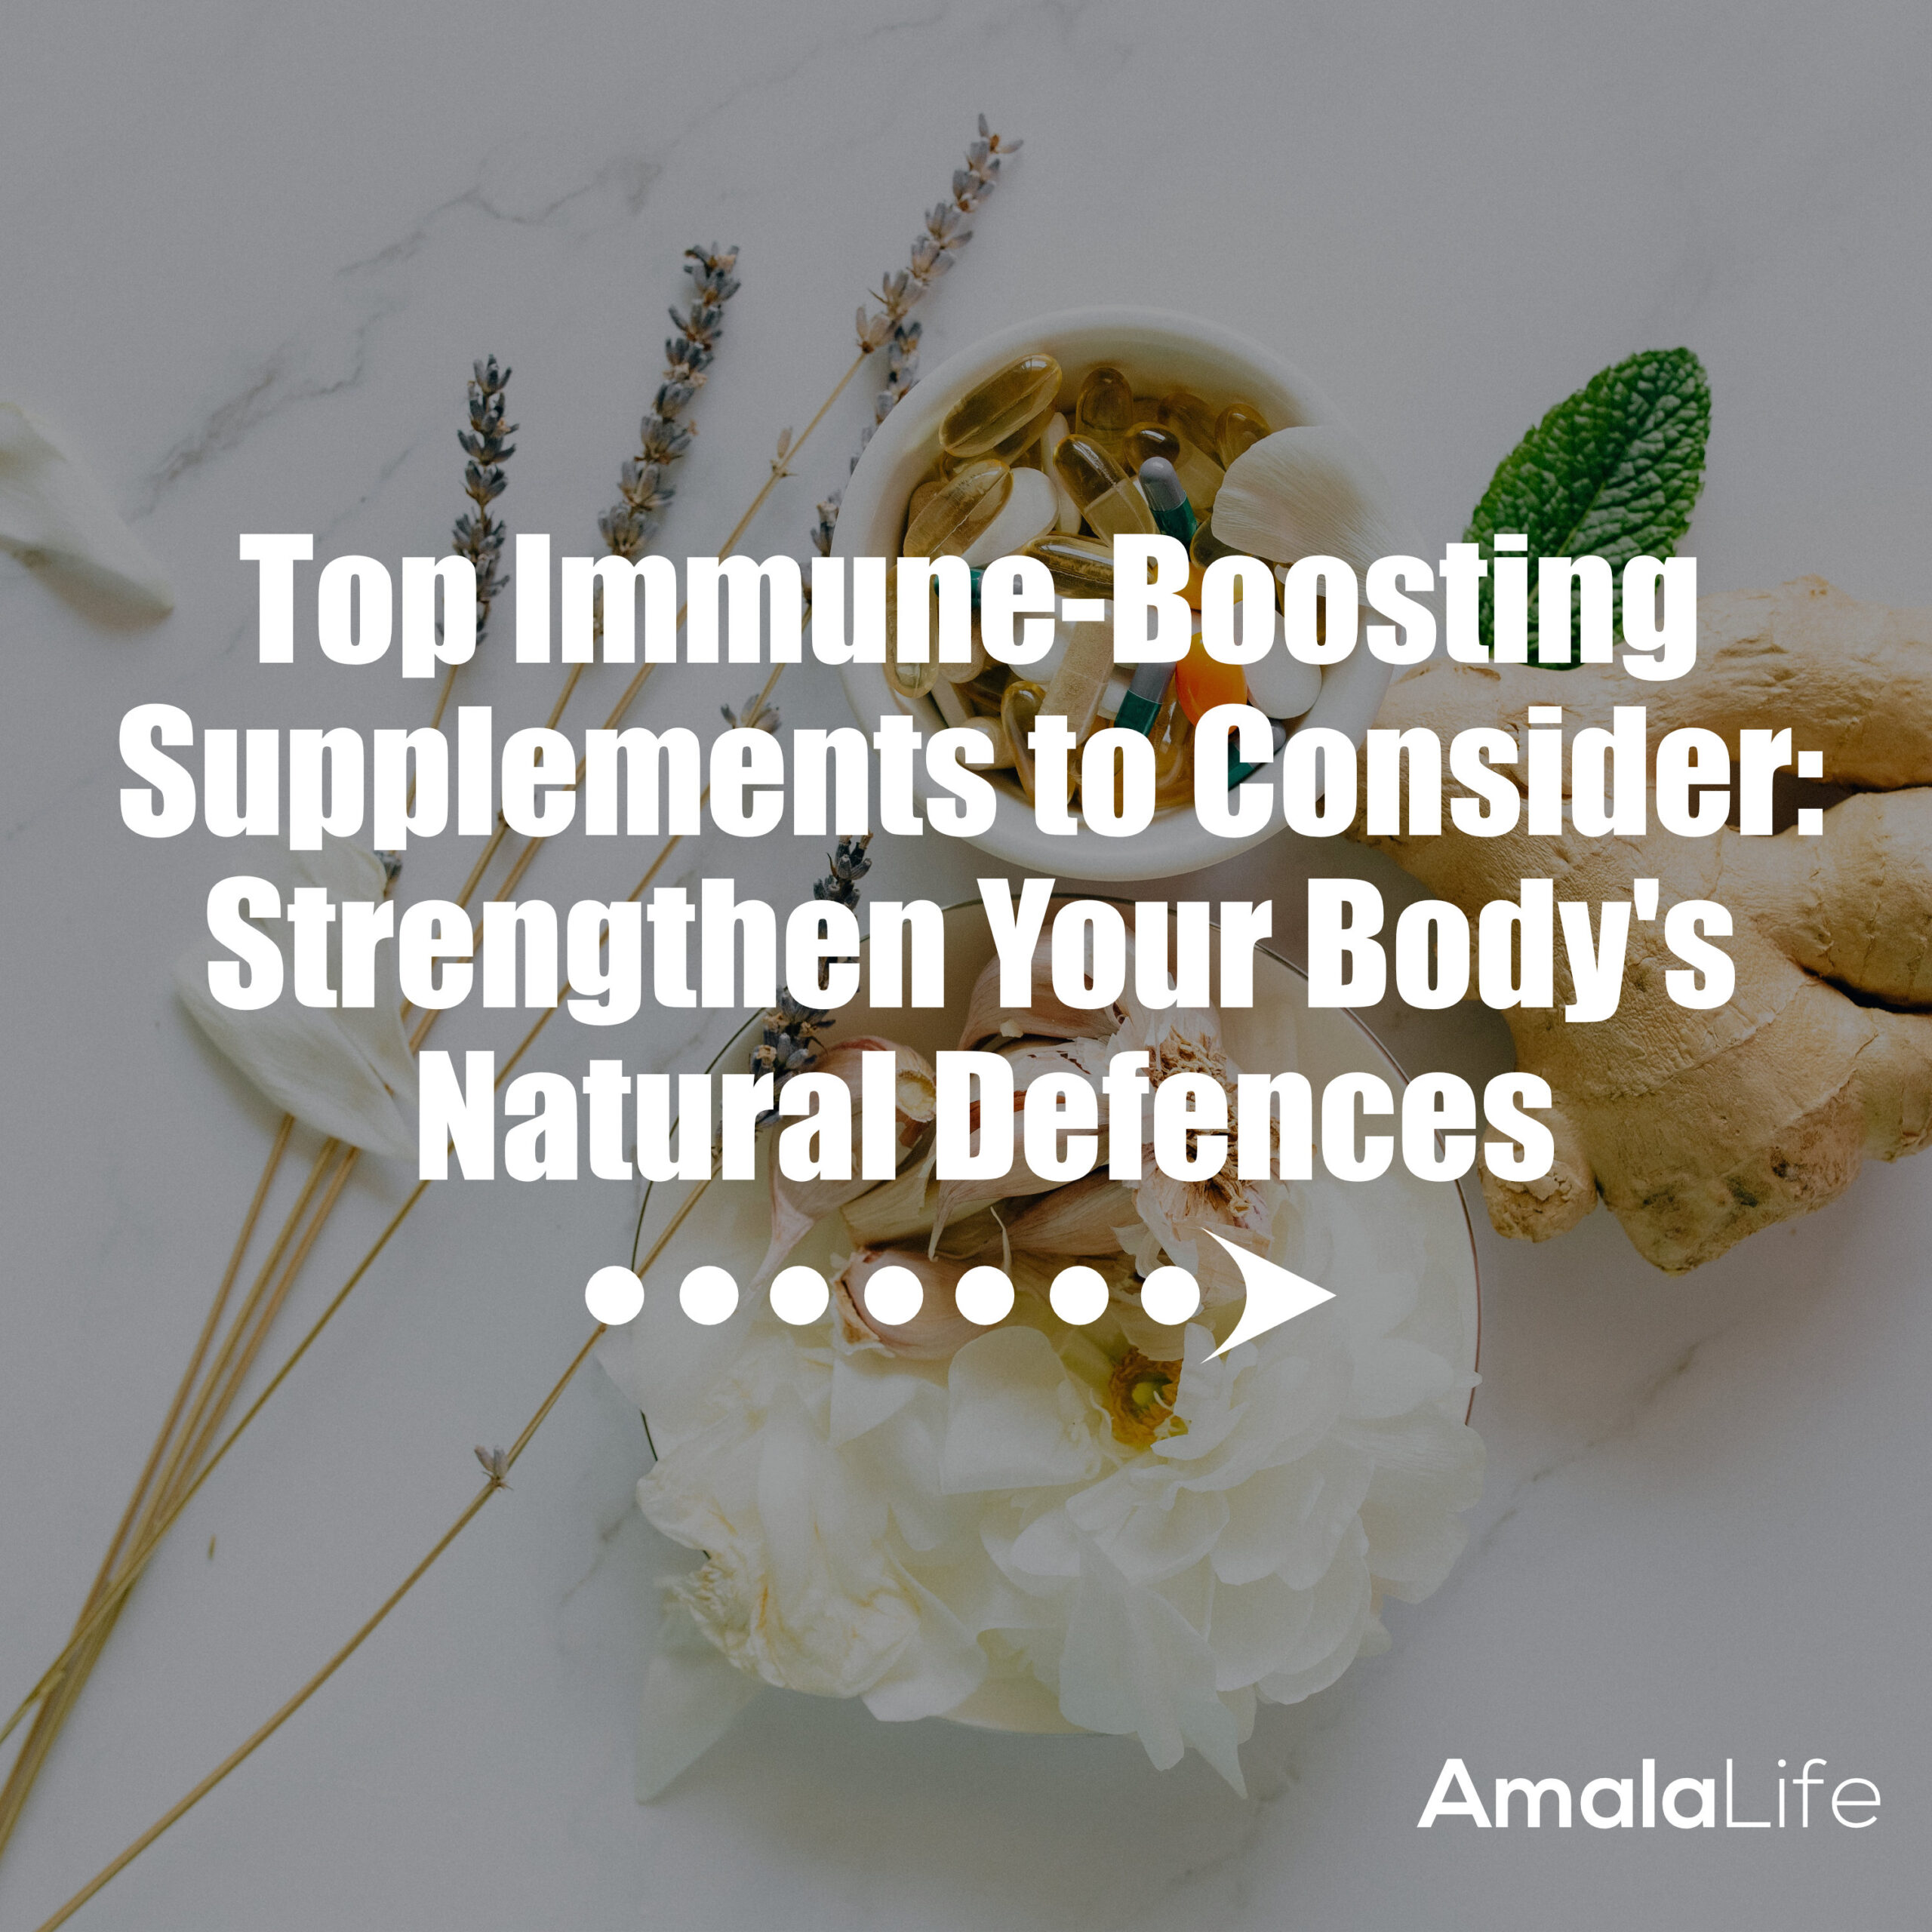 Top Immune-Boosting Supplements to Consider: Strengthen Your Body’s Natural Defenses